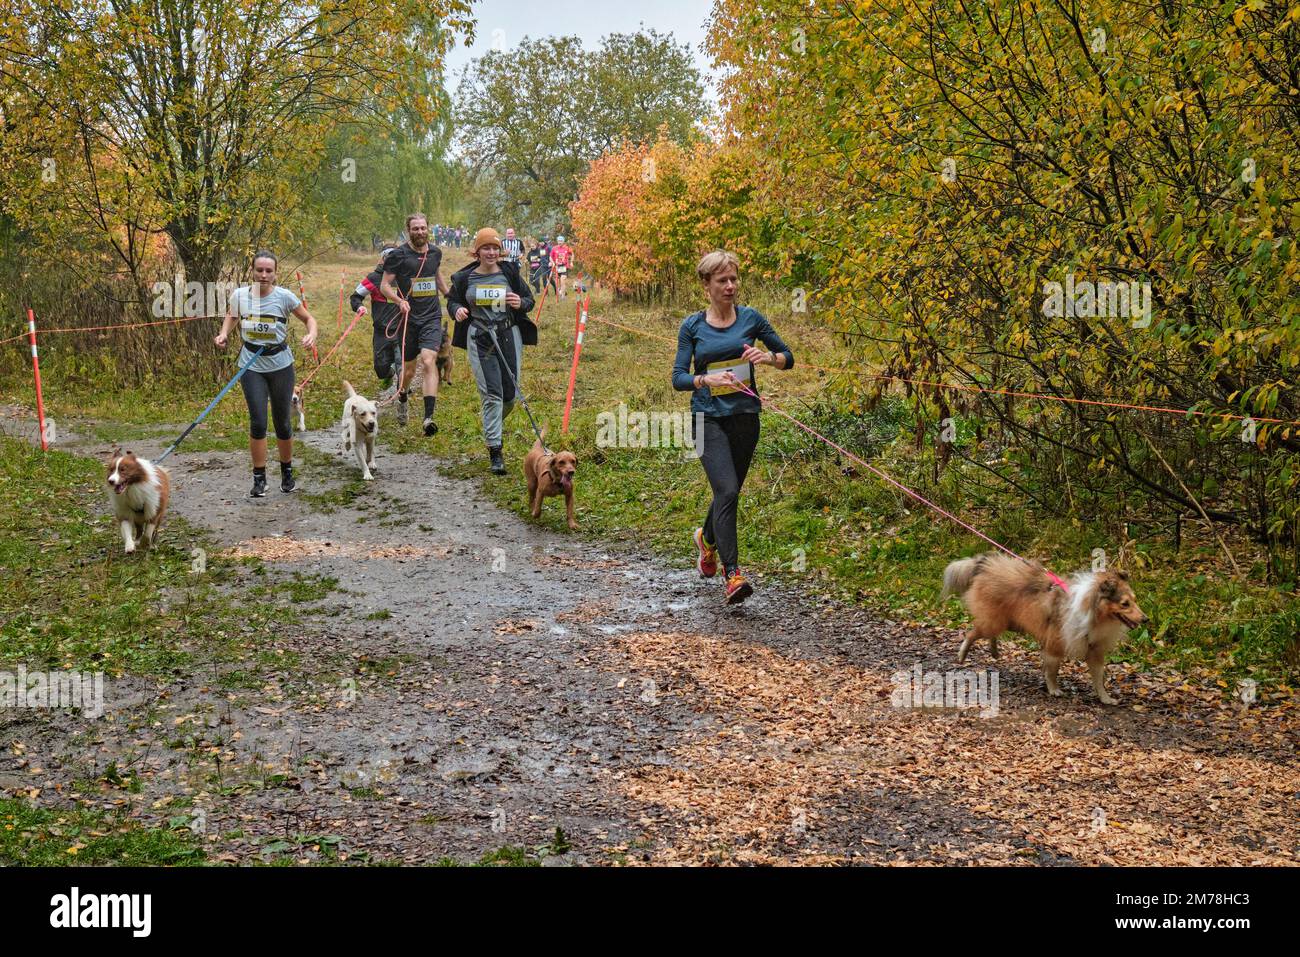 Dog owners run together with their dogs in an organized running competition. Bitsevski Park (Bitsa Park), Moscow, Russia. Stock Photo